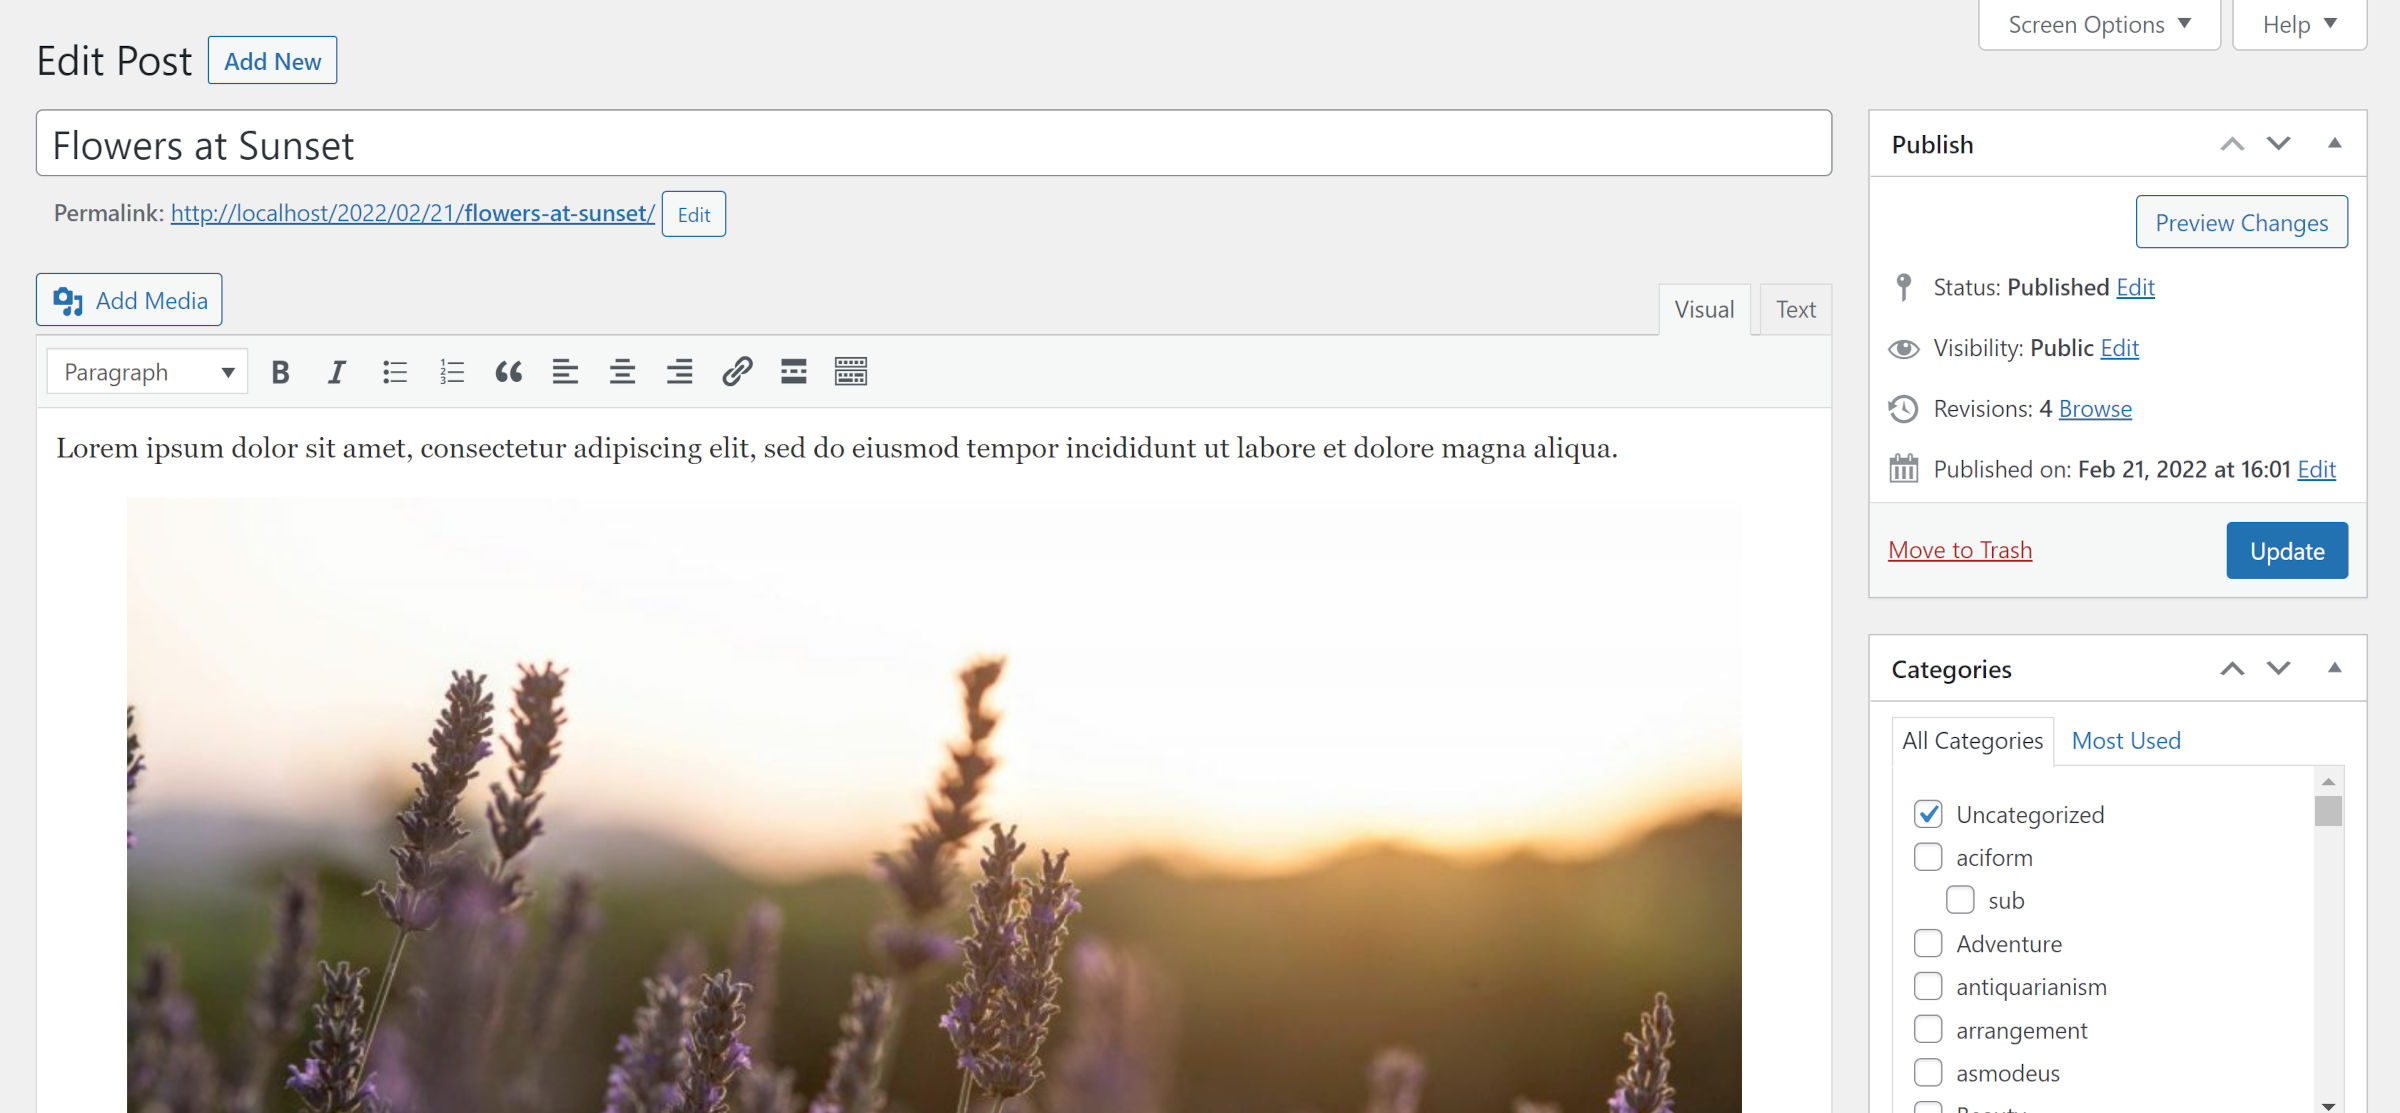 quickpost-classic-editor QuickPost Plugin Allows Users To Create New or Duplicate Posts from the WordPress Content Editor design tips 